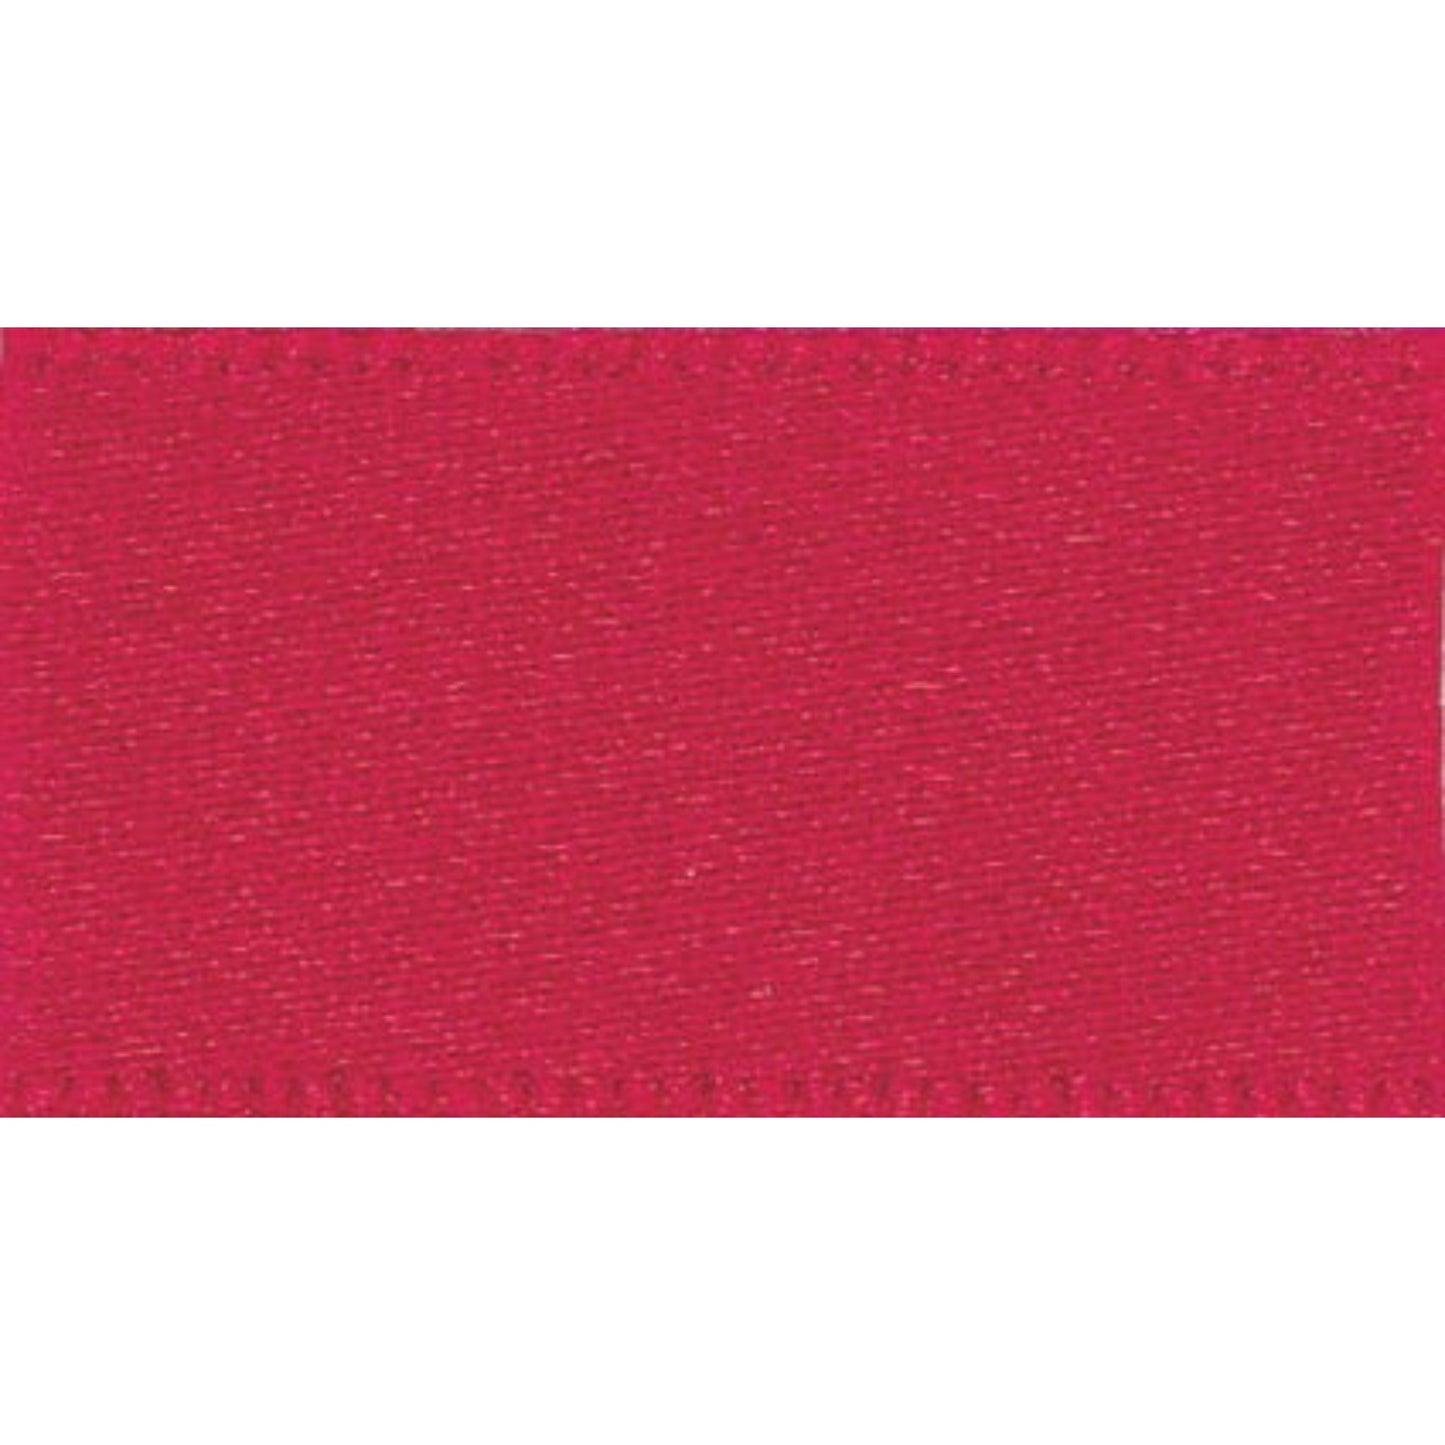 Double Faced Satin Ribbon: Red: 10mm Wide. Price per metre.